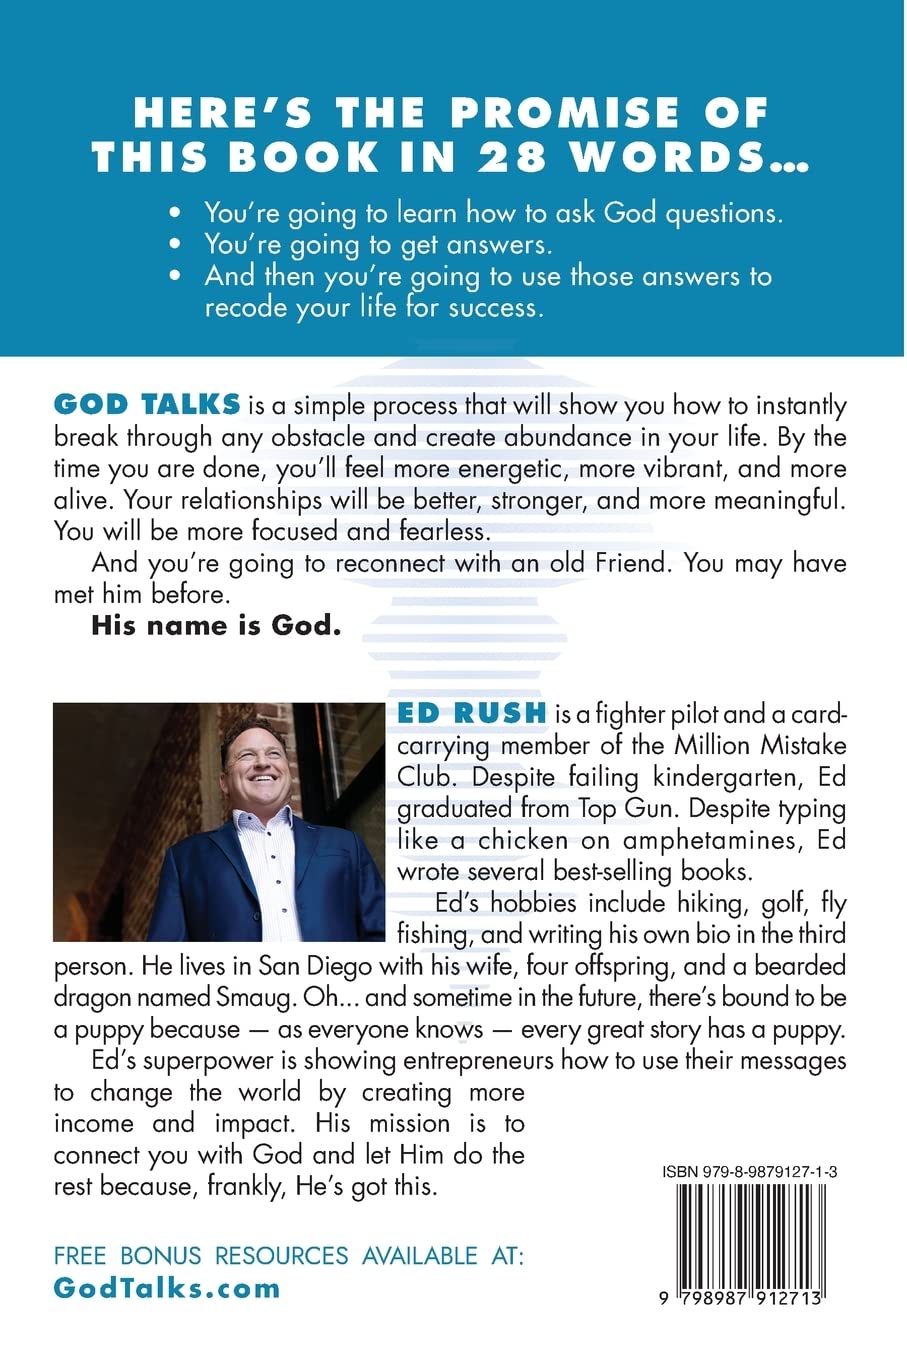 God Talks: How to Have a Friendship with God (Even if You’ve Made a Million Mistakes)